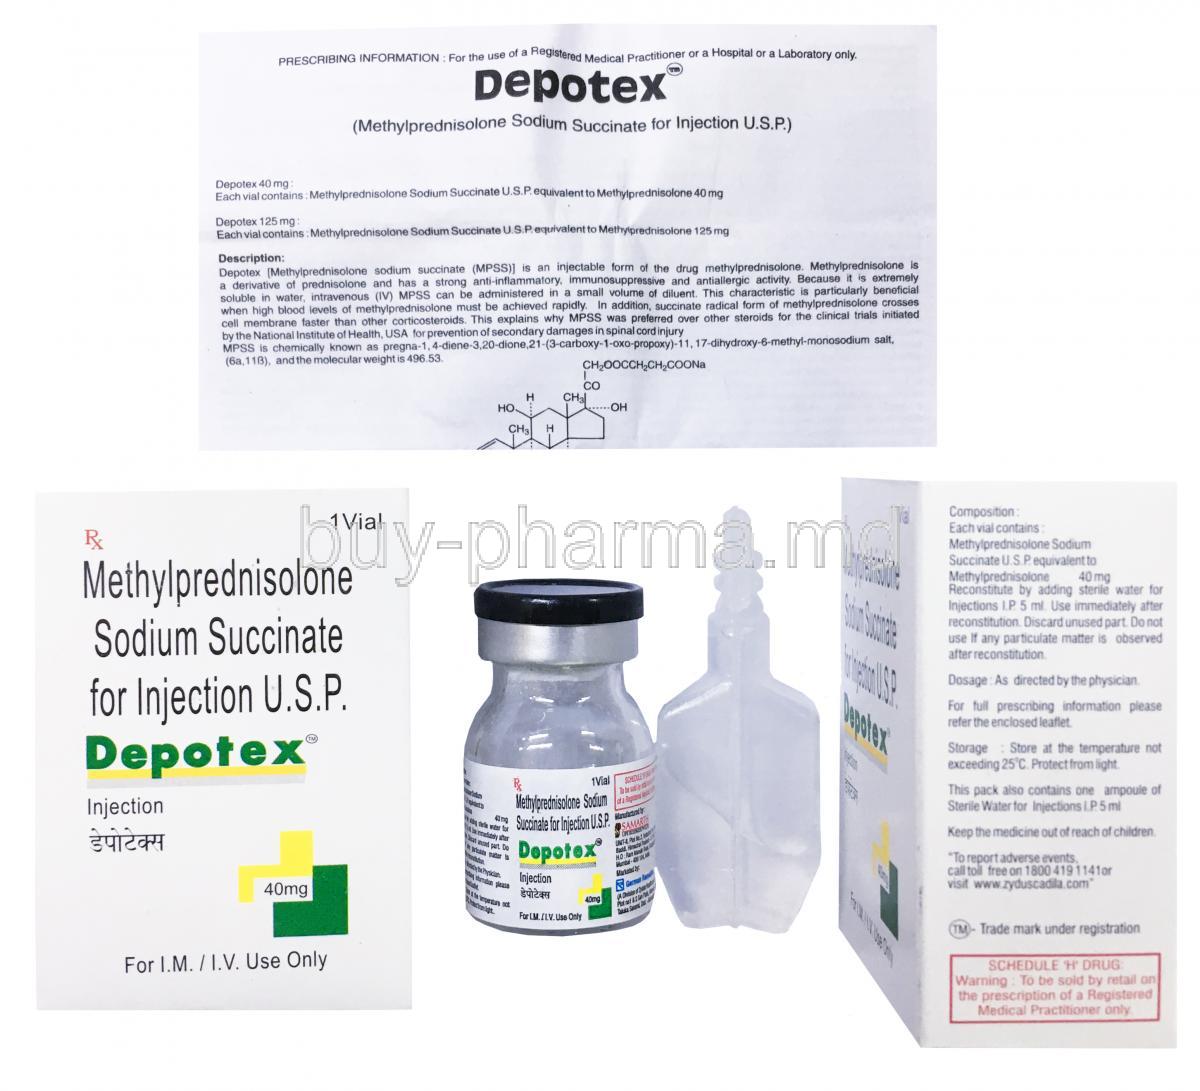 Depotex Injection, Methylprednisolone Injection 40mg, Zydus Cadila, Vial, box and insert presentation